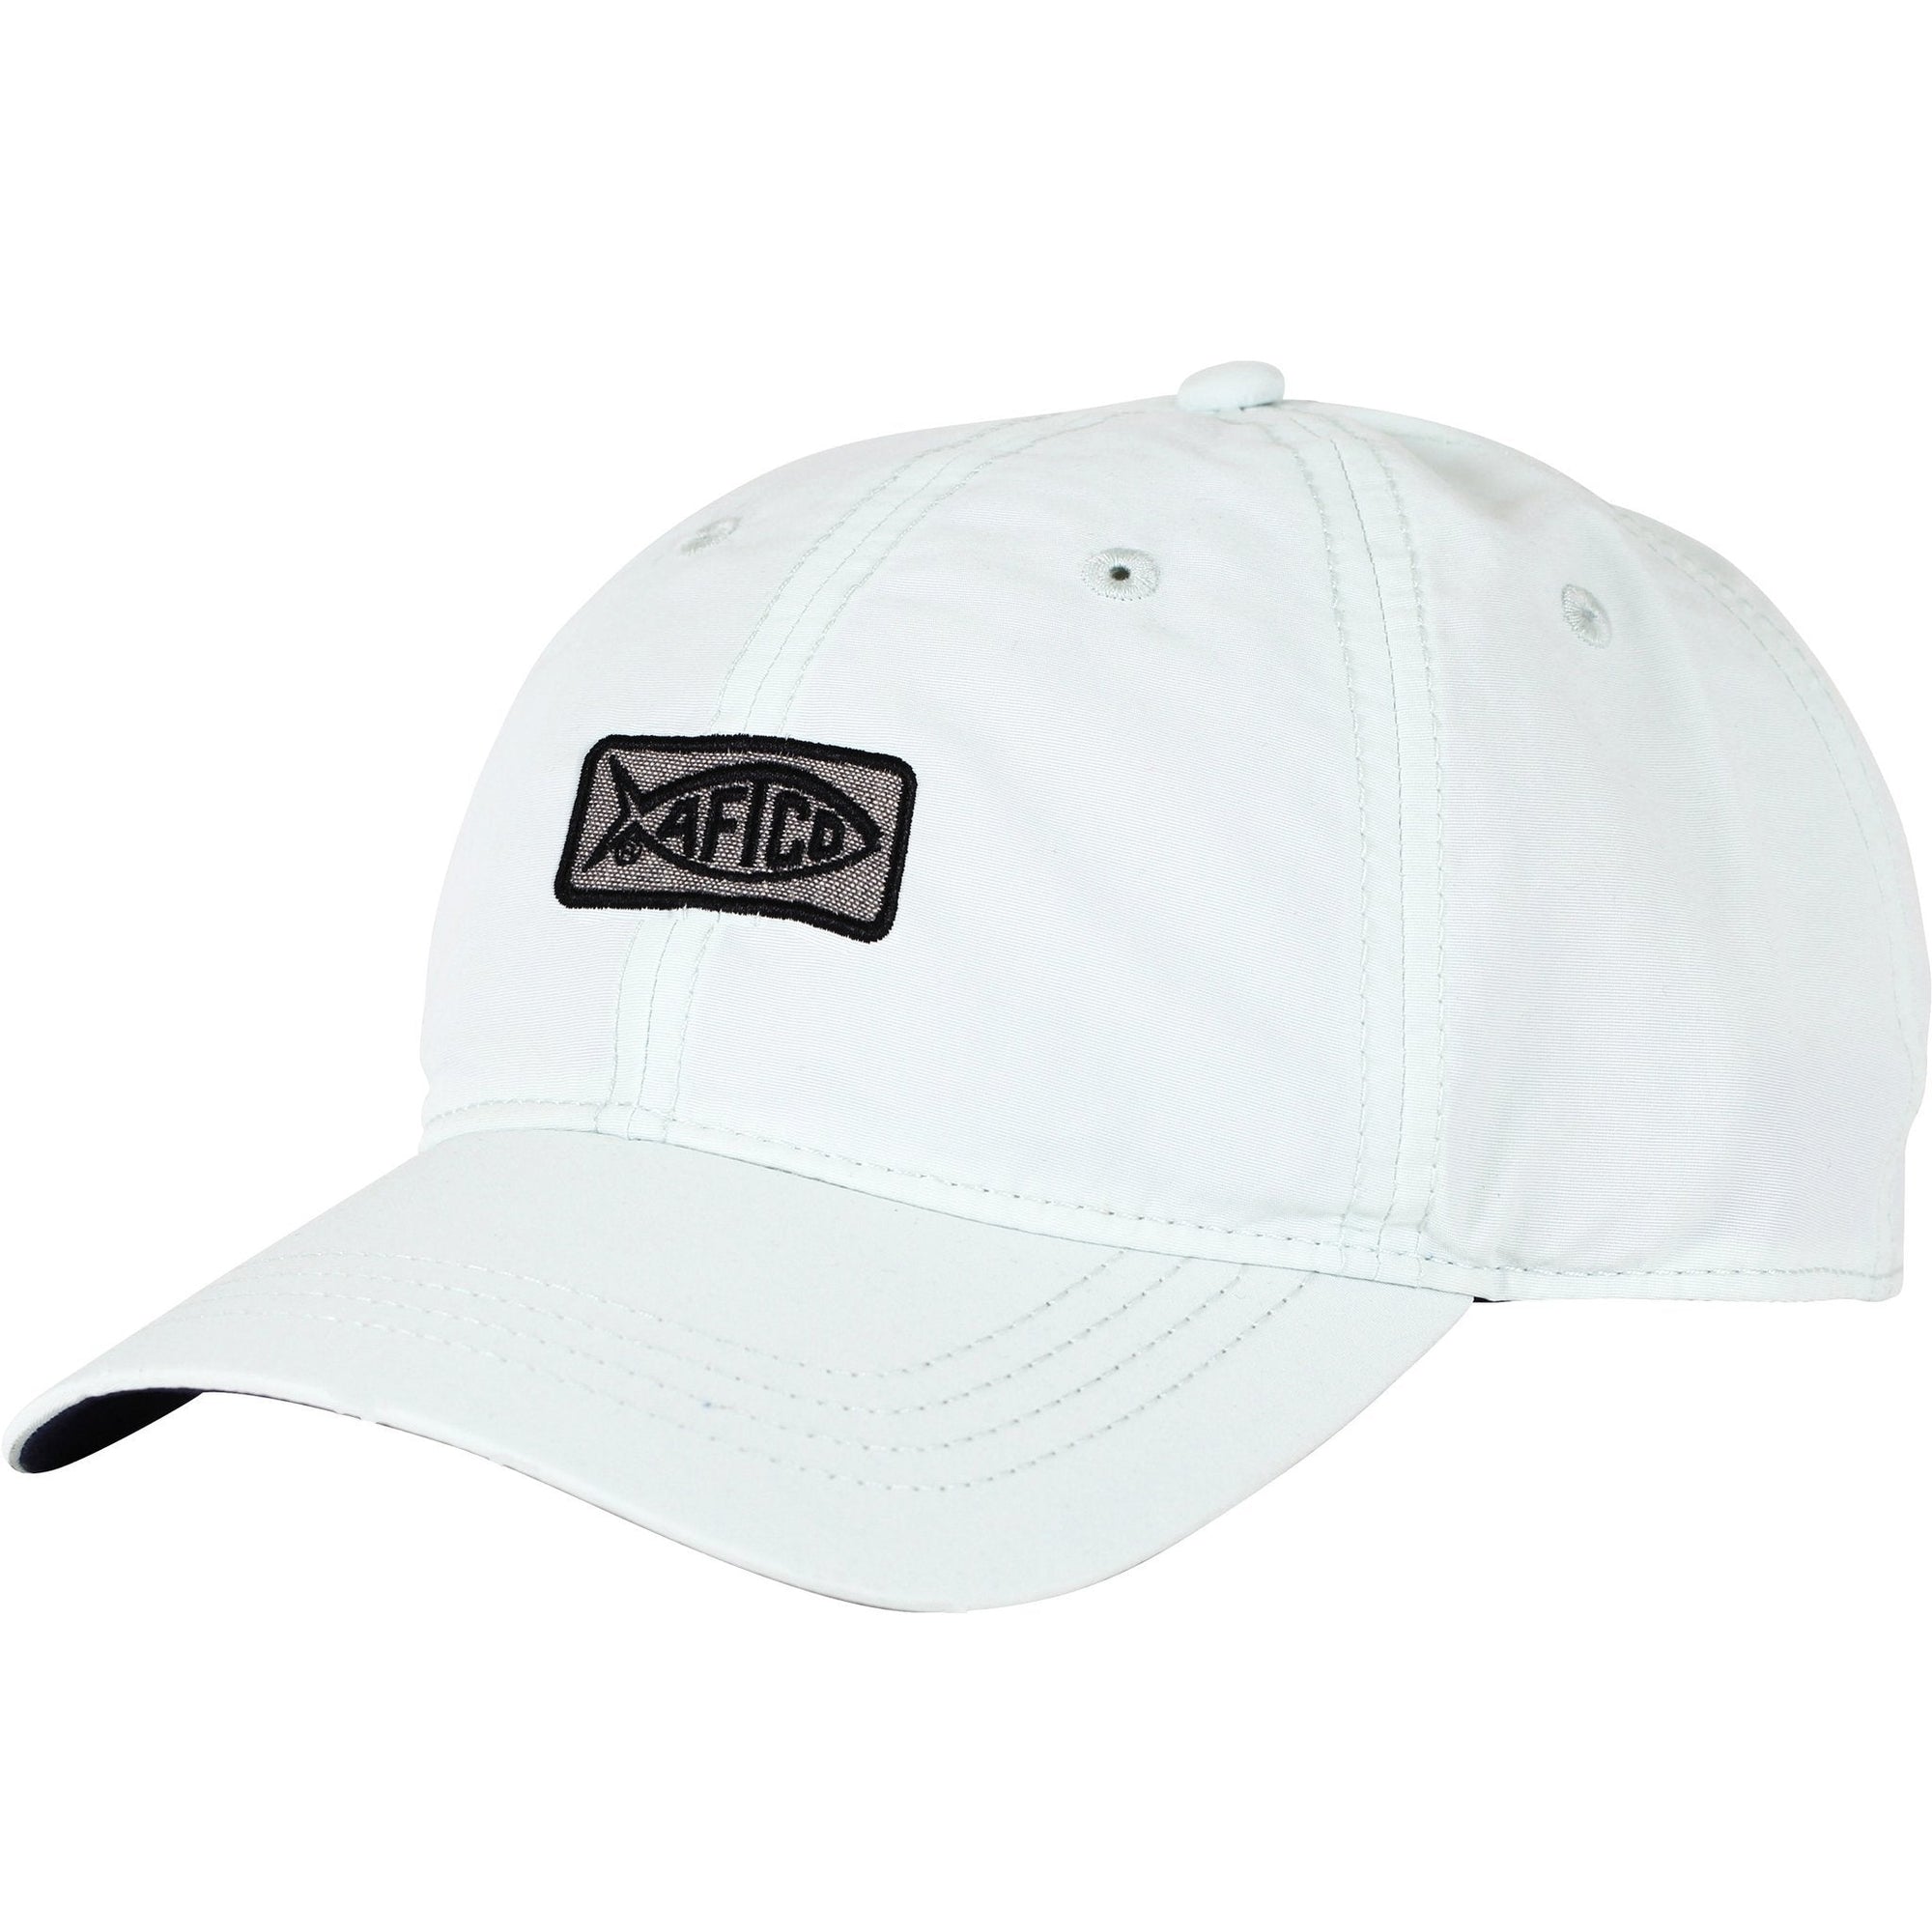 AFTCO Youth Original Fishing Hat